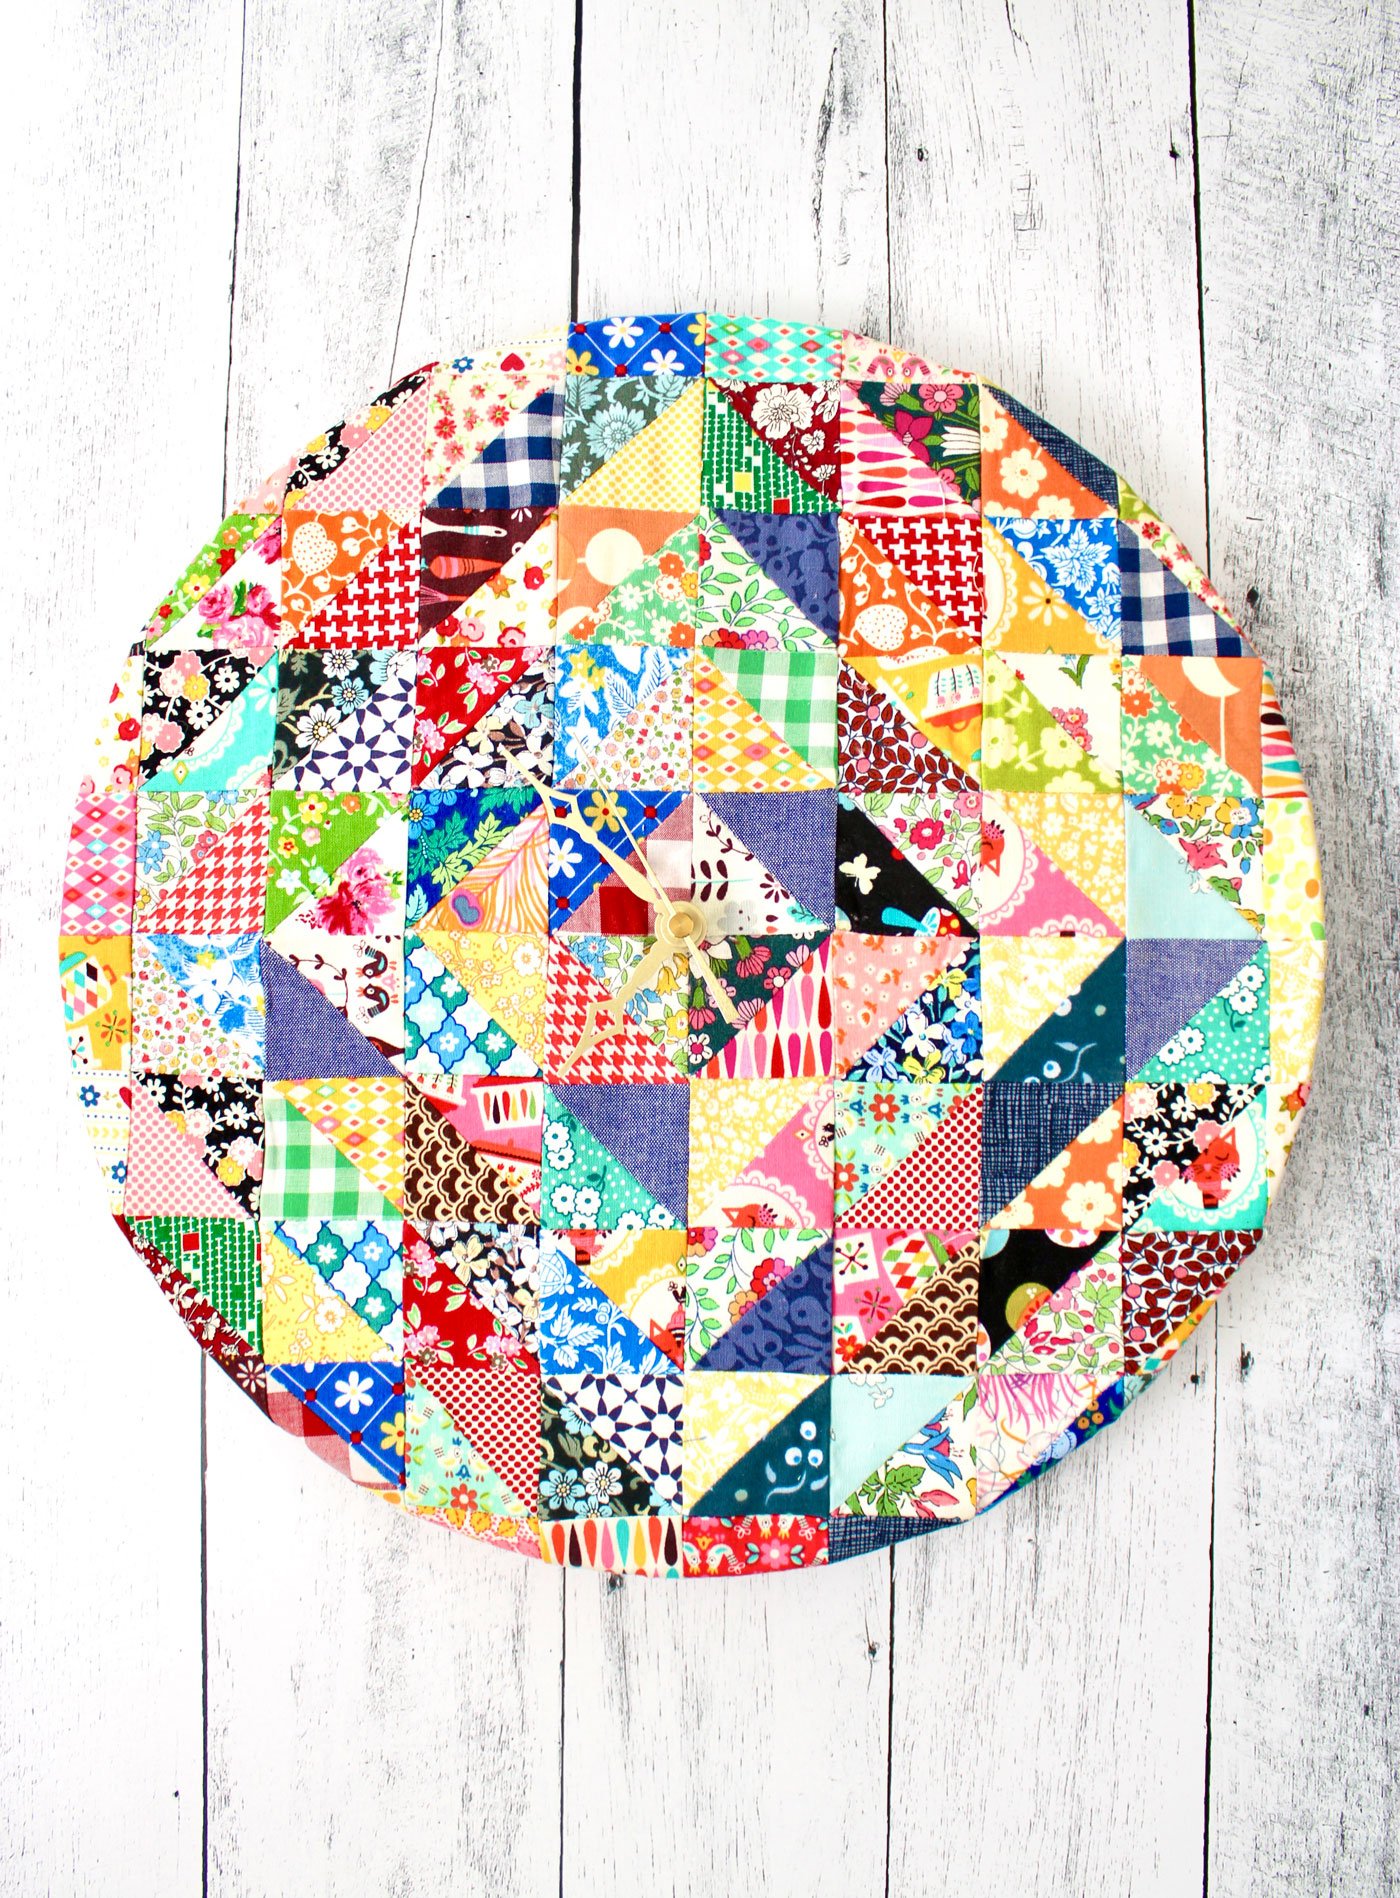 Scrappy Patchwork Clock Tutorial - The Polka Dot Chair